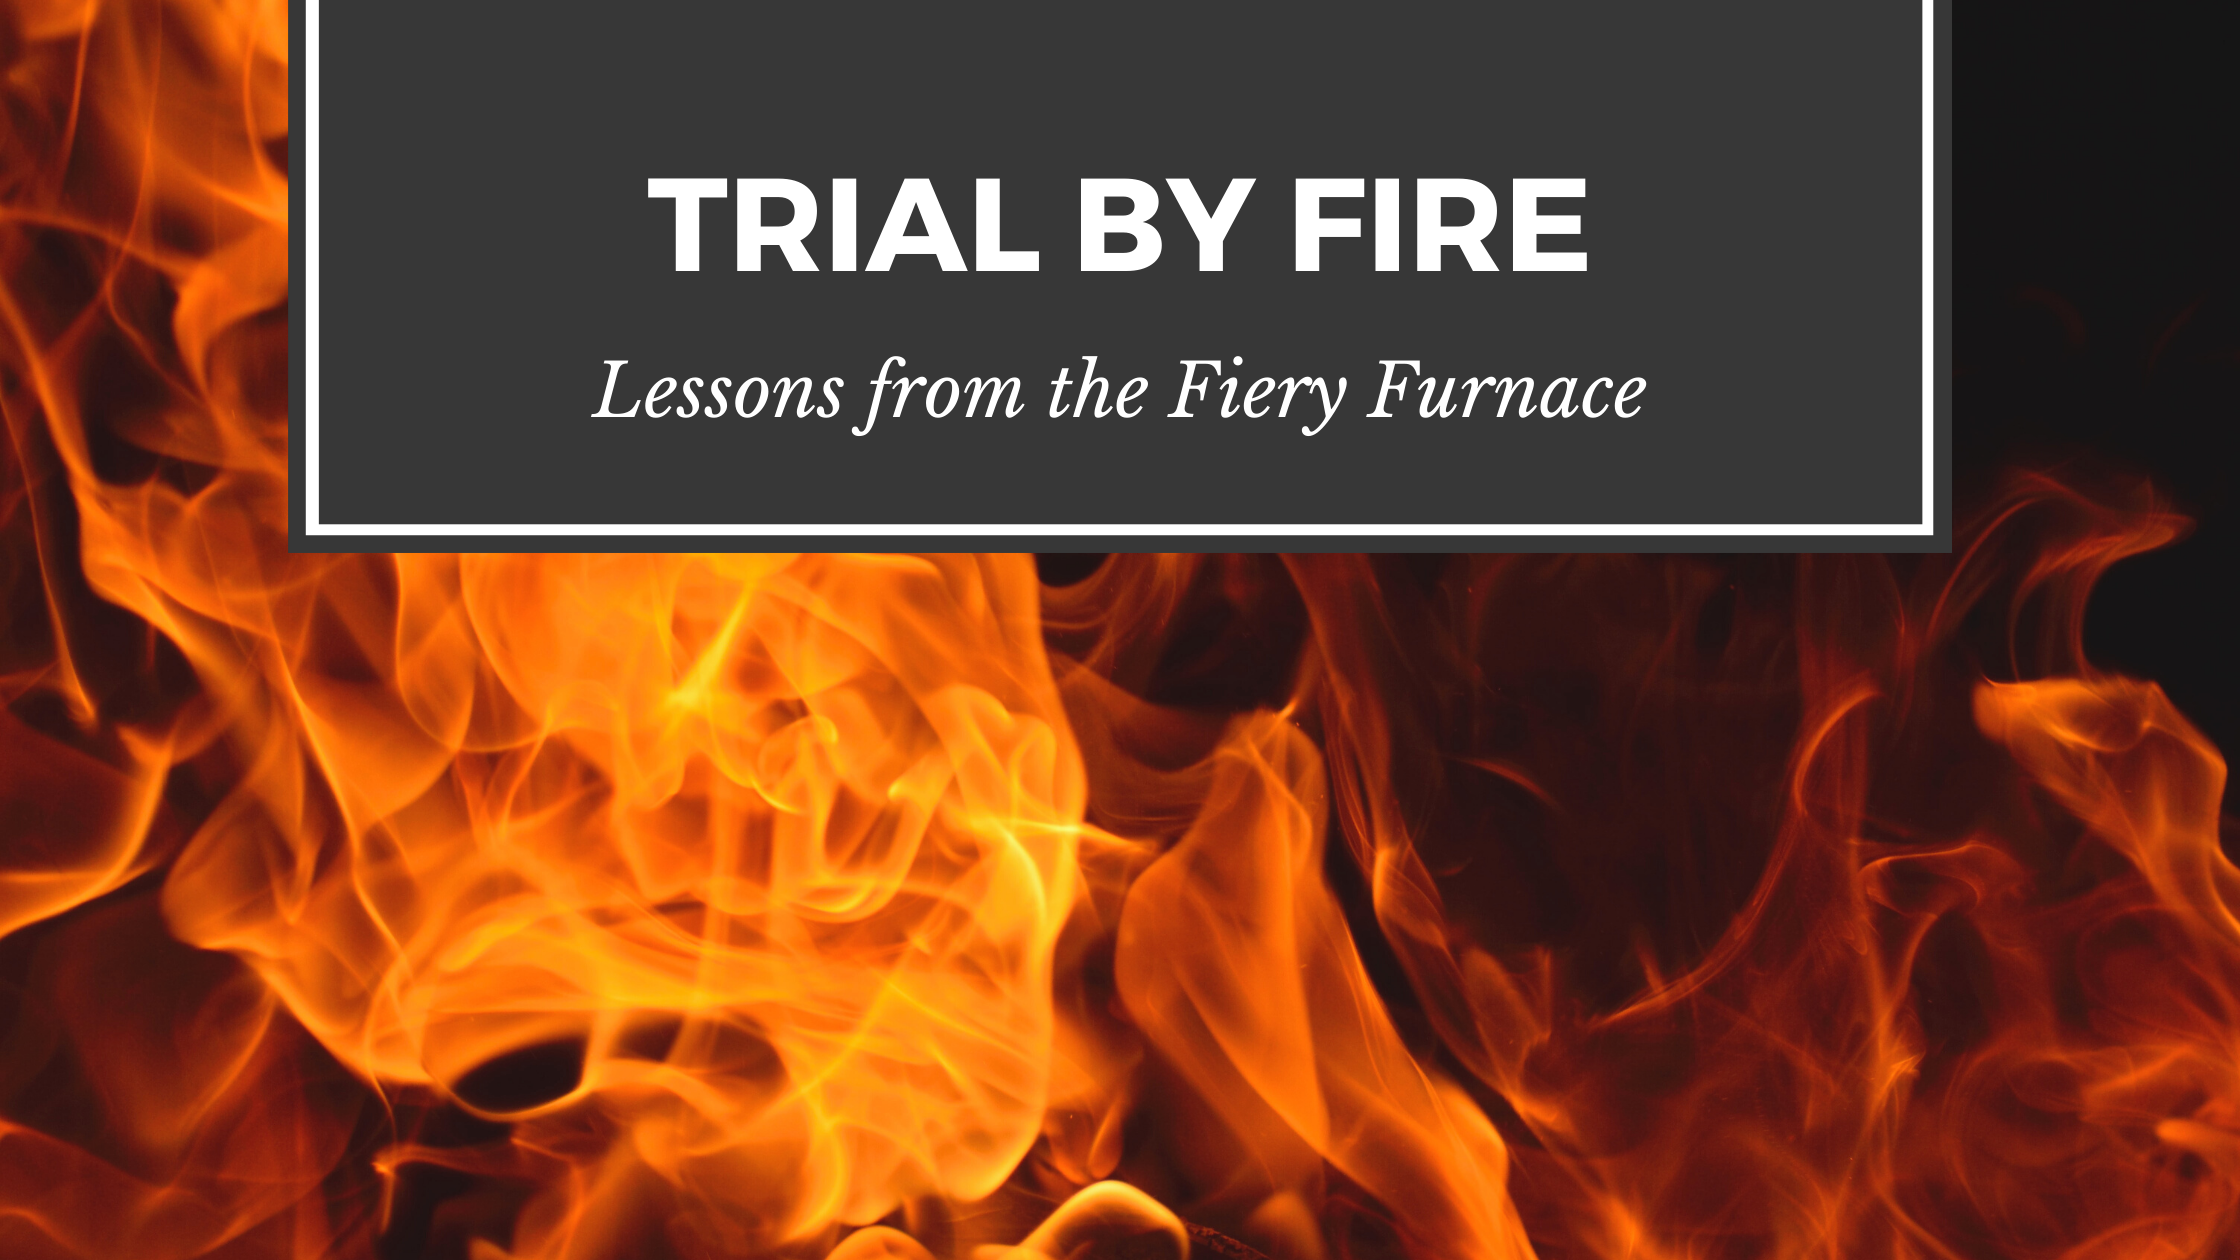 Trial by Fire: Lessons from the Fiery Furnace blog title with fire background